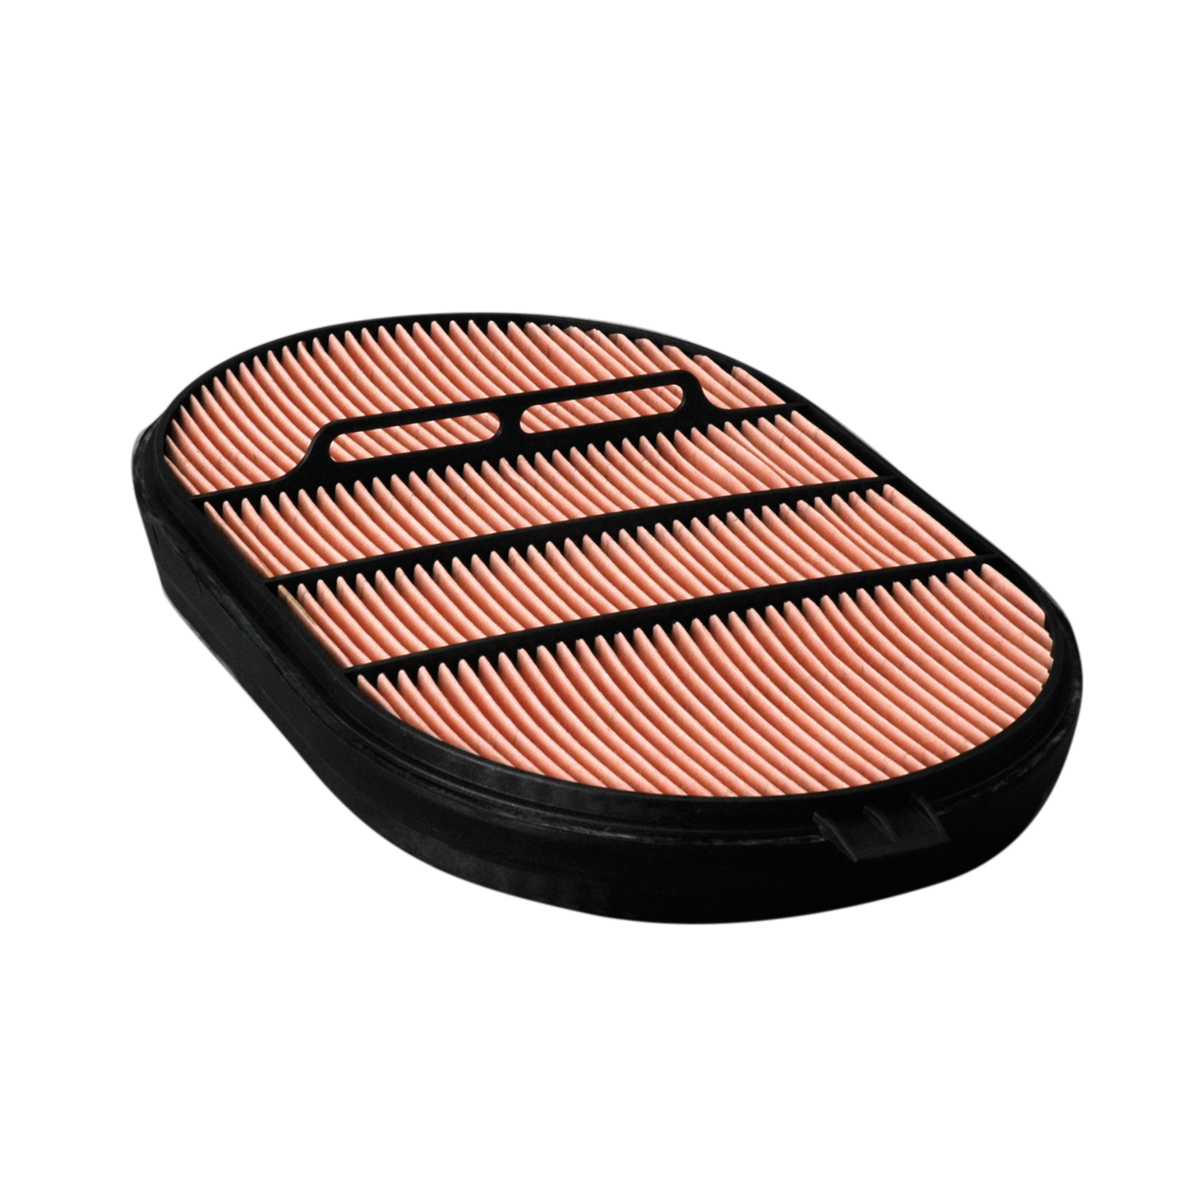 Primary Air Filter P607557 Powercore